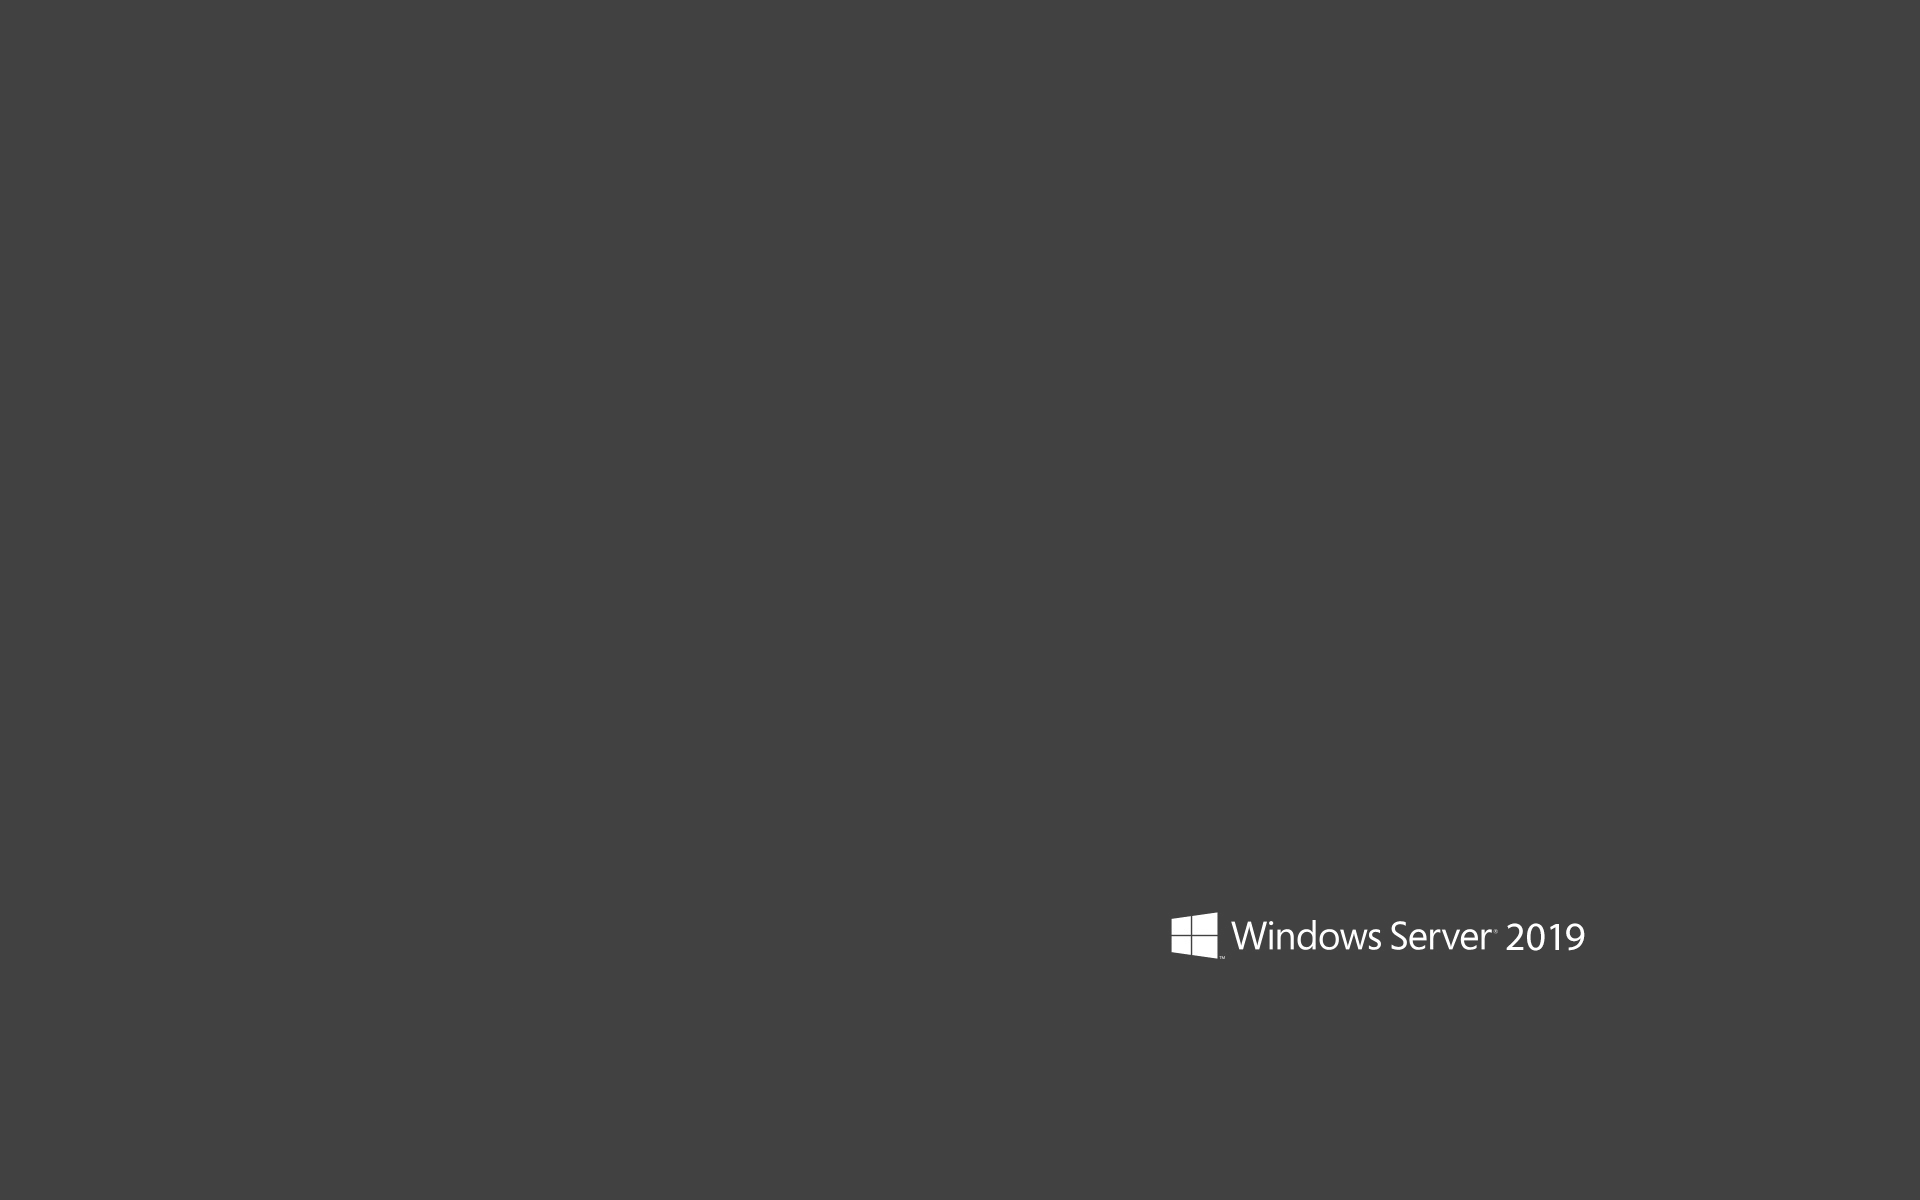 Windows Server 2019 Wallpaper in the 2012 Style